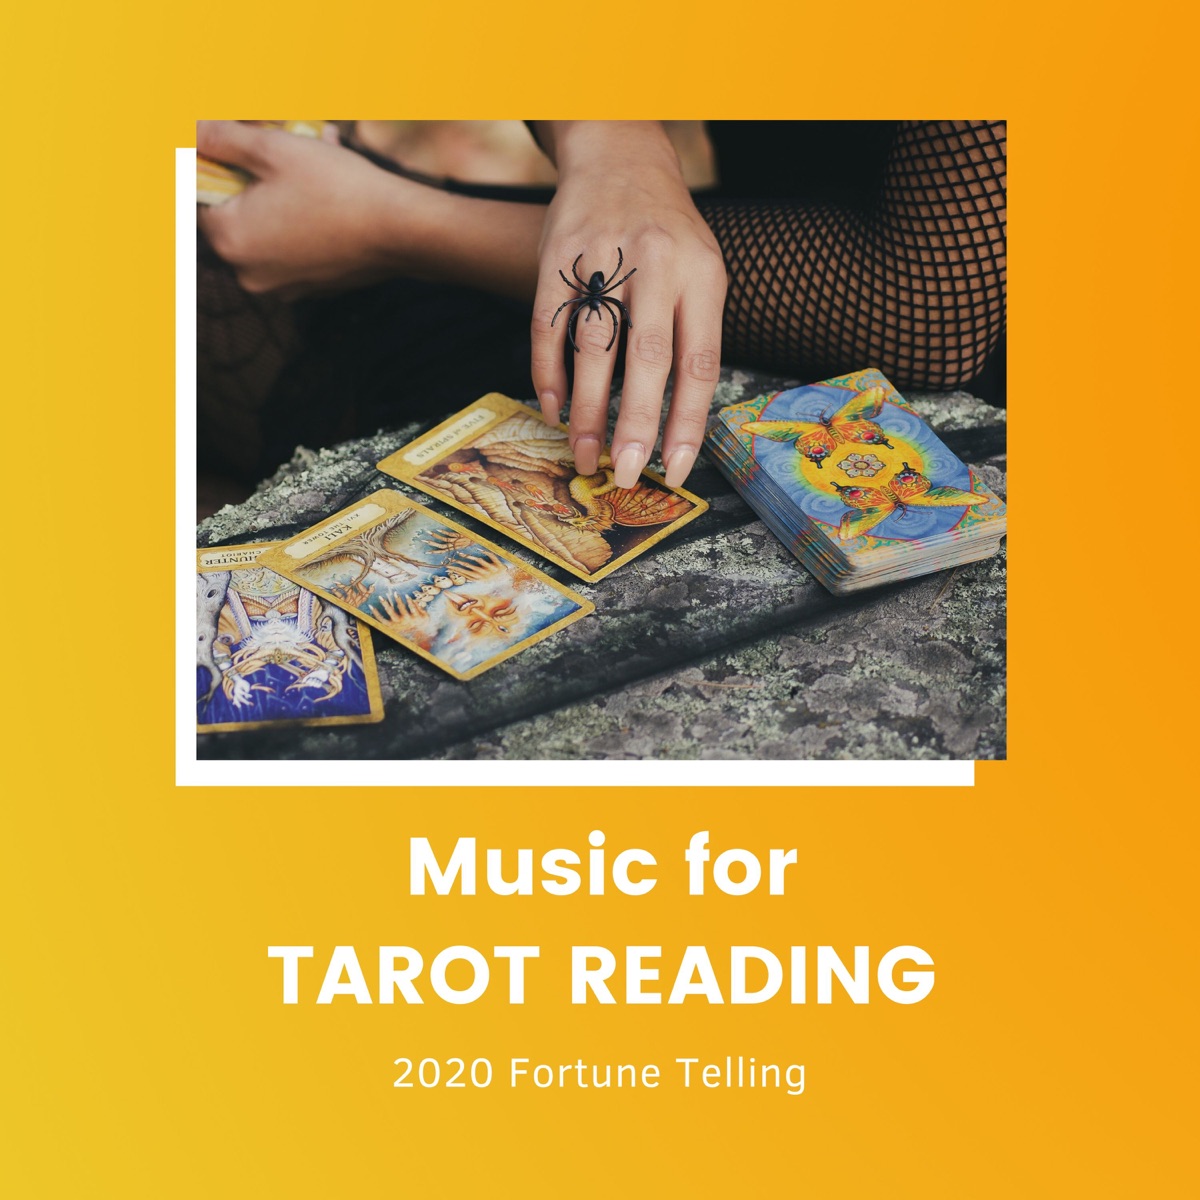 for Tarot Reading - 2020 Fortune Telling Leap Year Songs by Madama on Apple Music